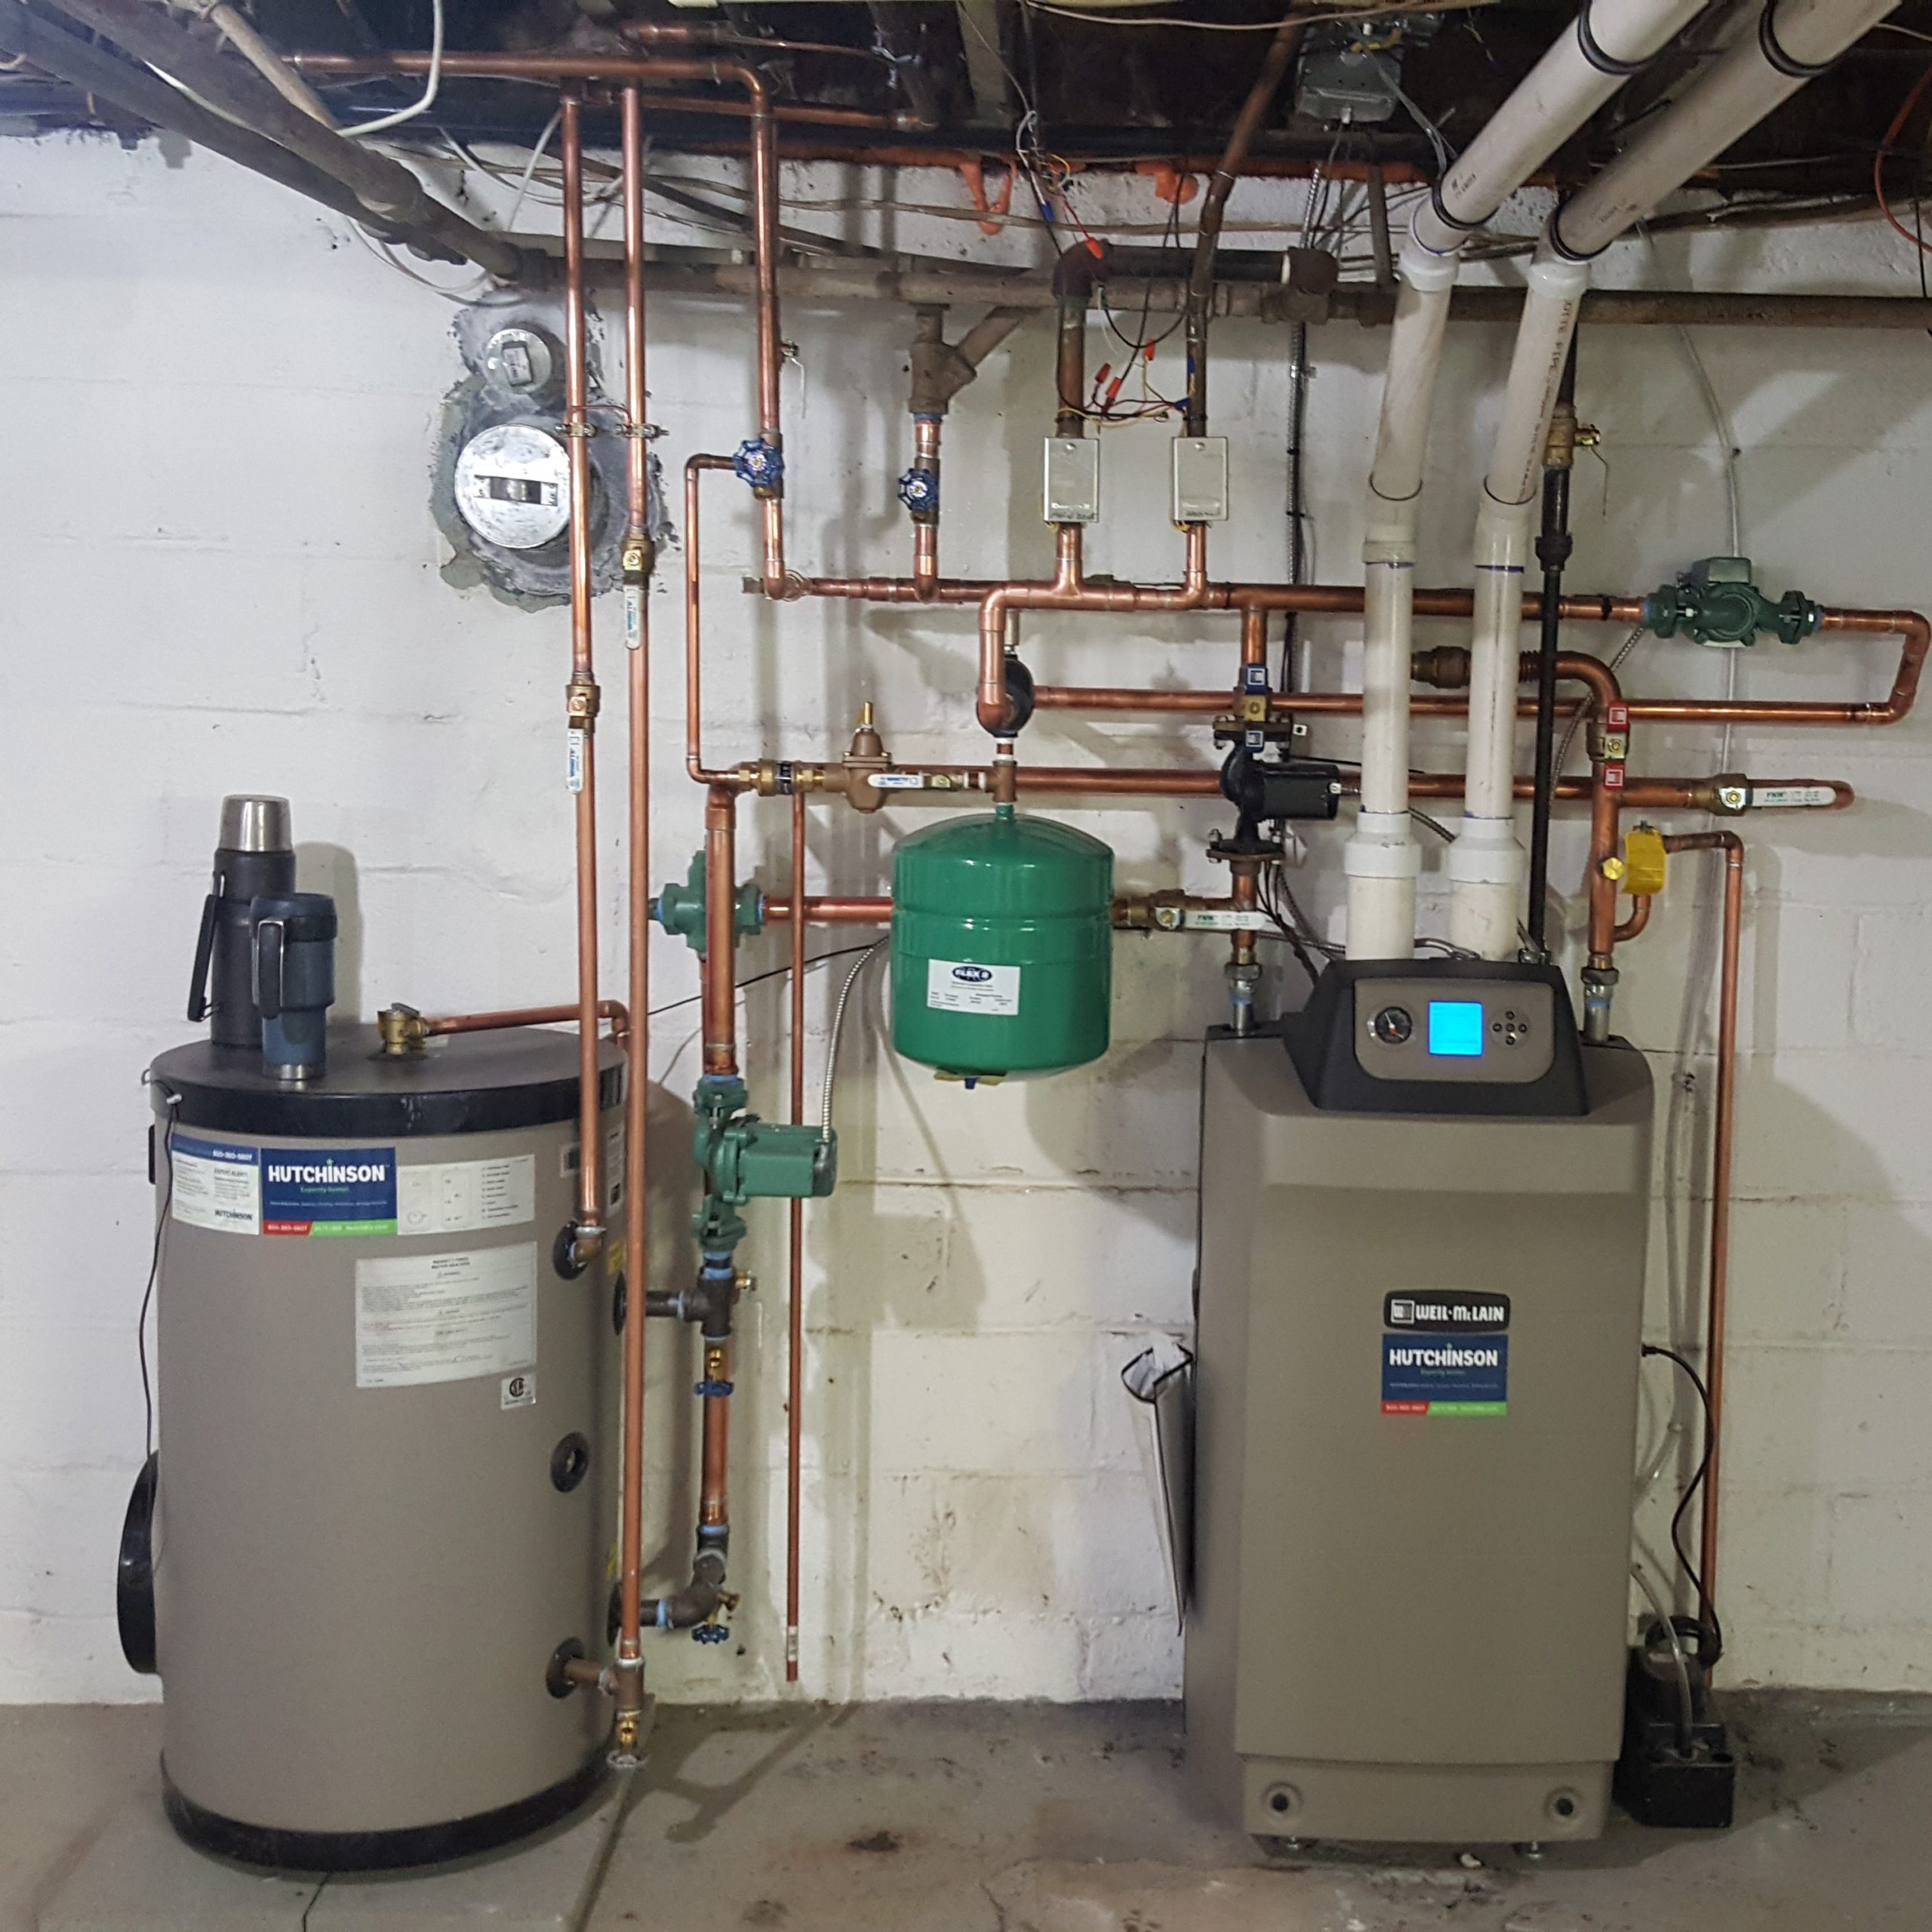 Plumbing, Heating and Air Conditioning Services in Rio Grande, NJ